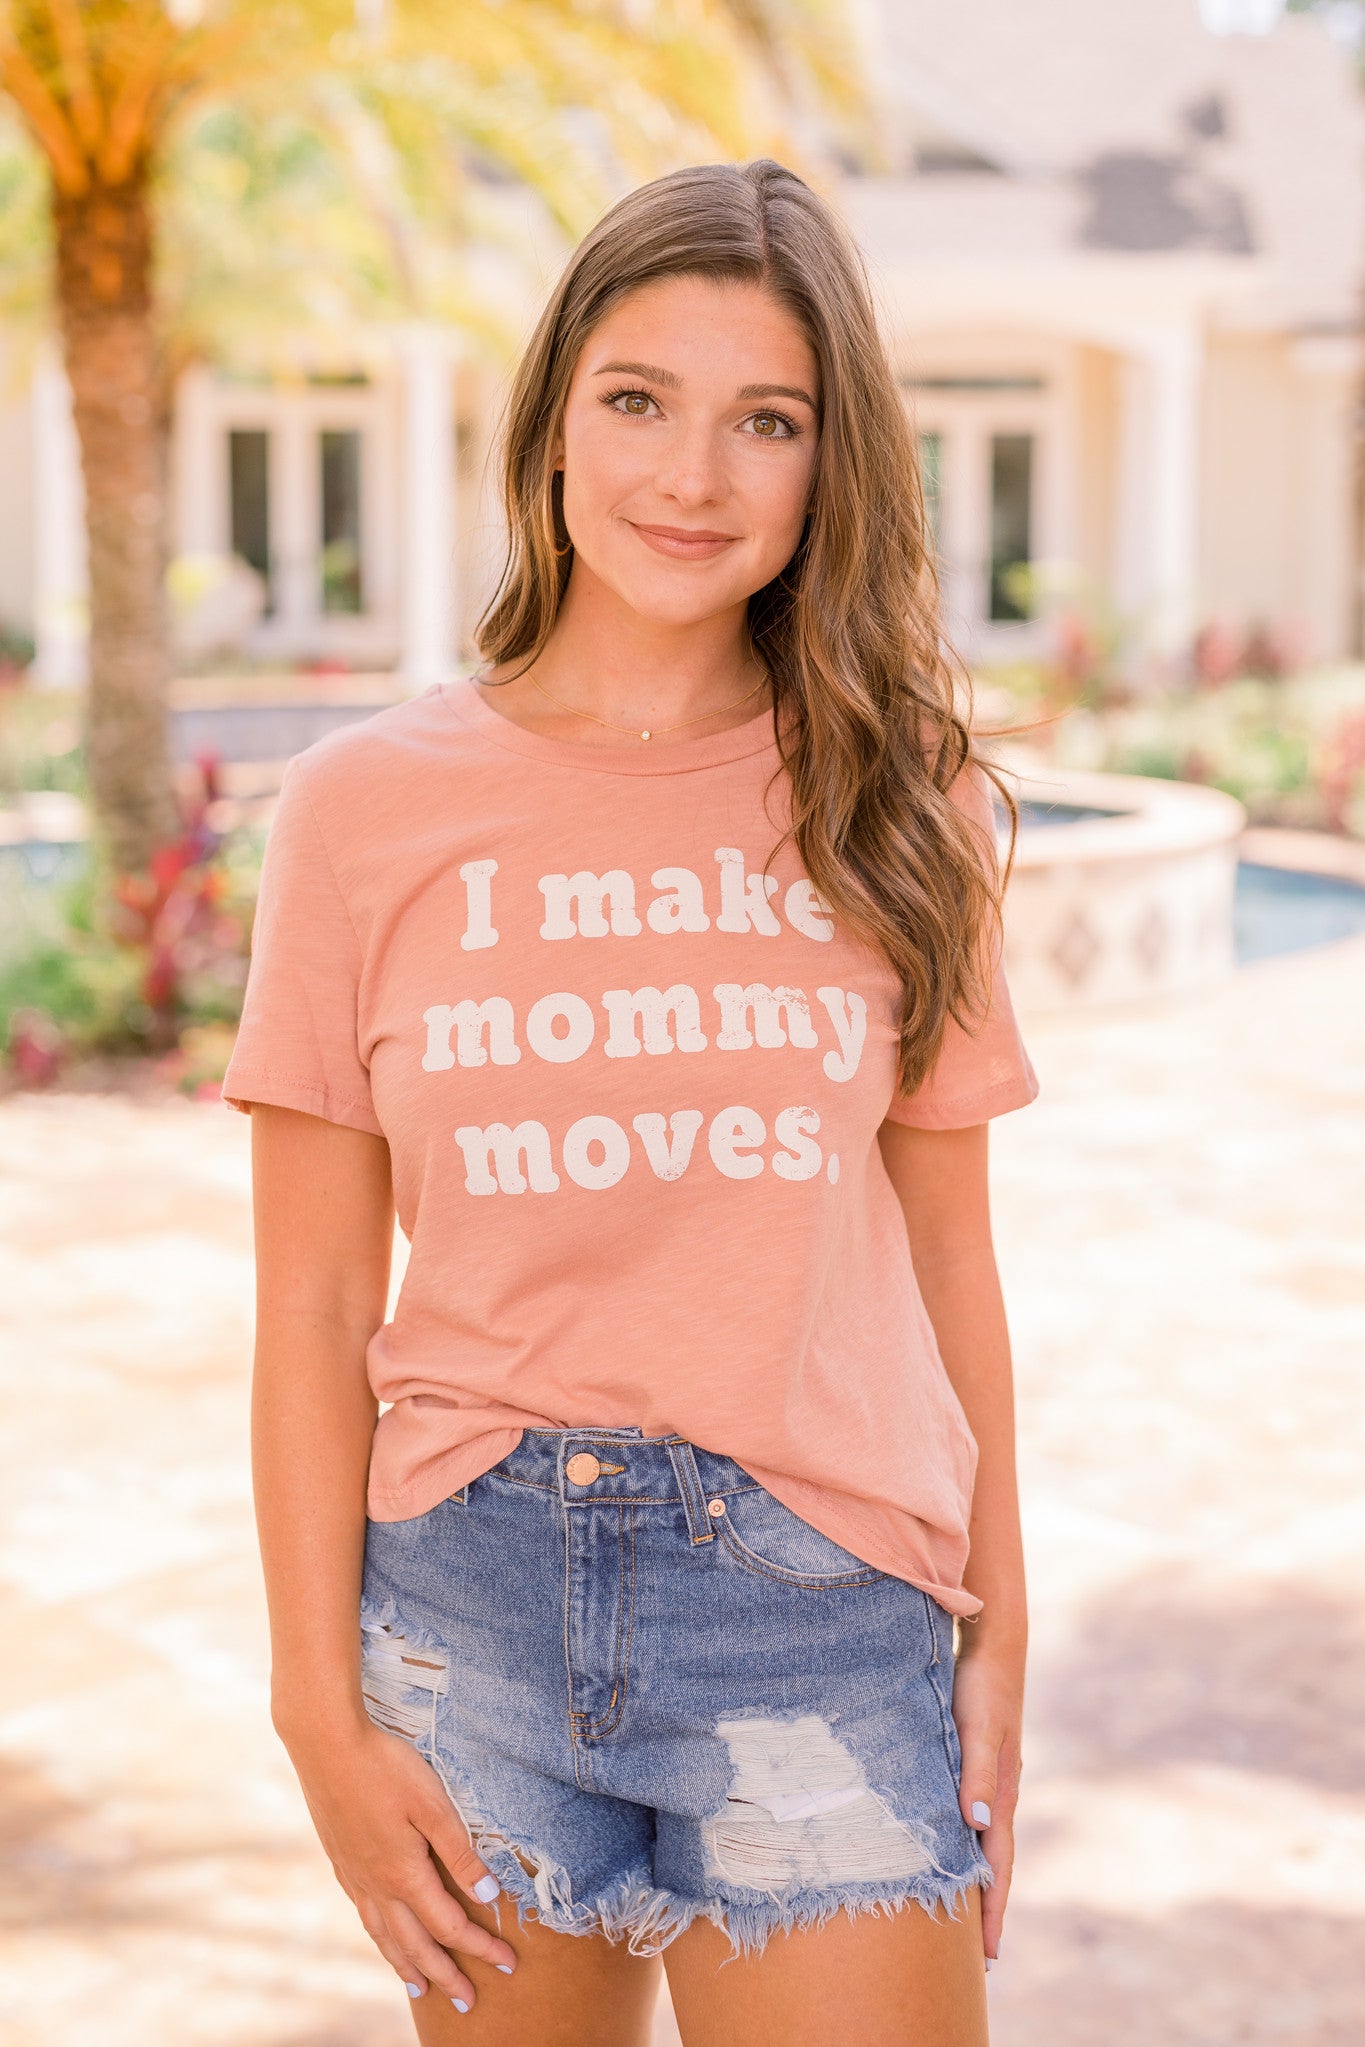 Mommy Moves Tee